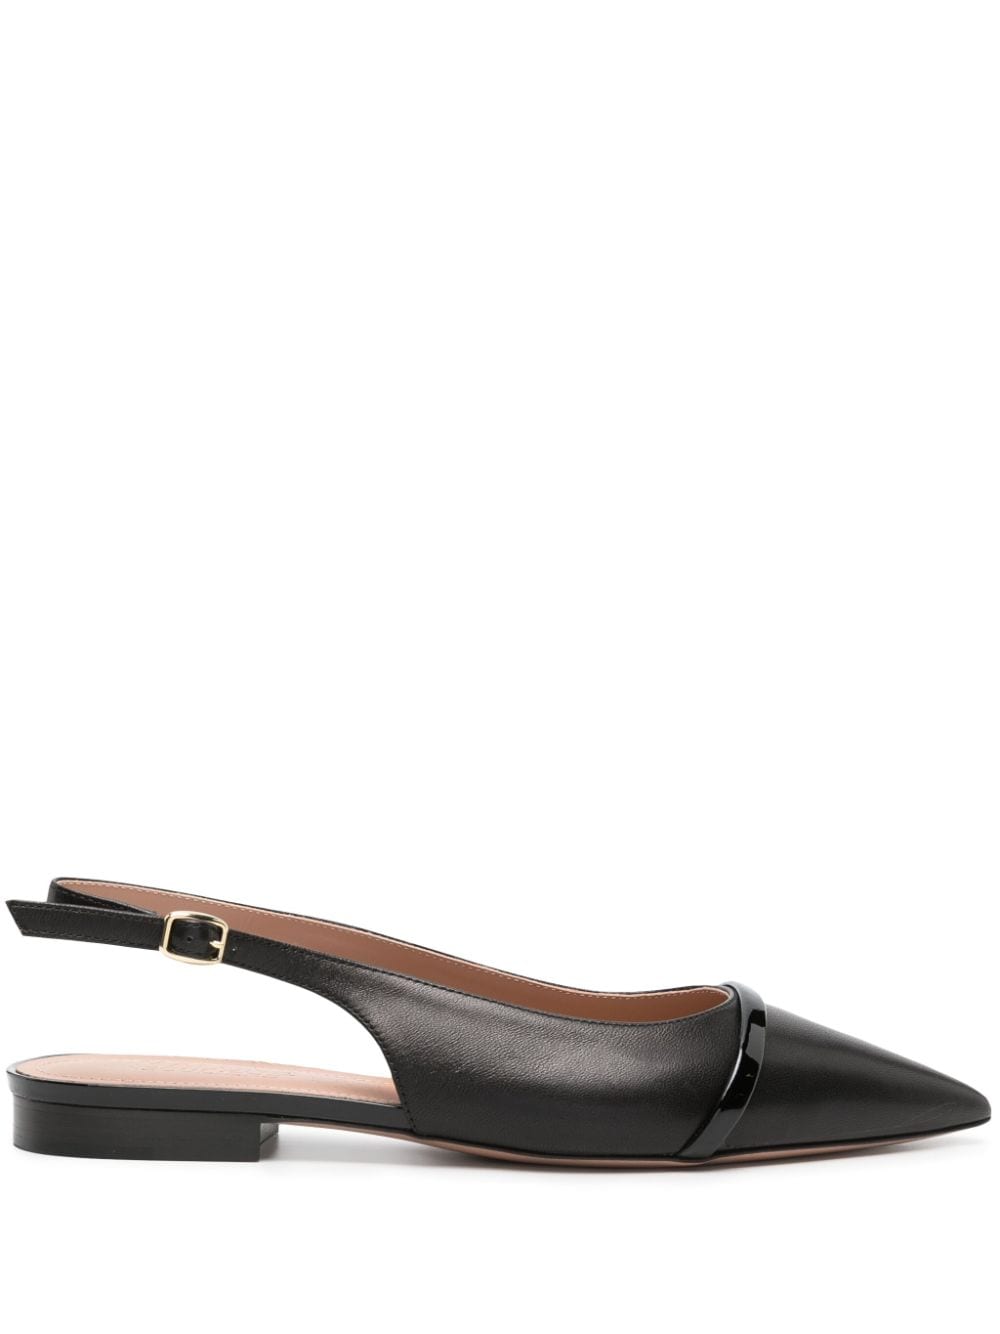 Shop Malone Souliers Jama Ballerina Shoes In Black